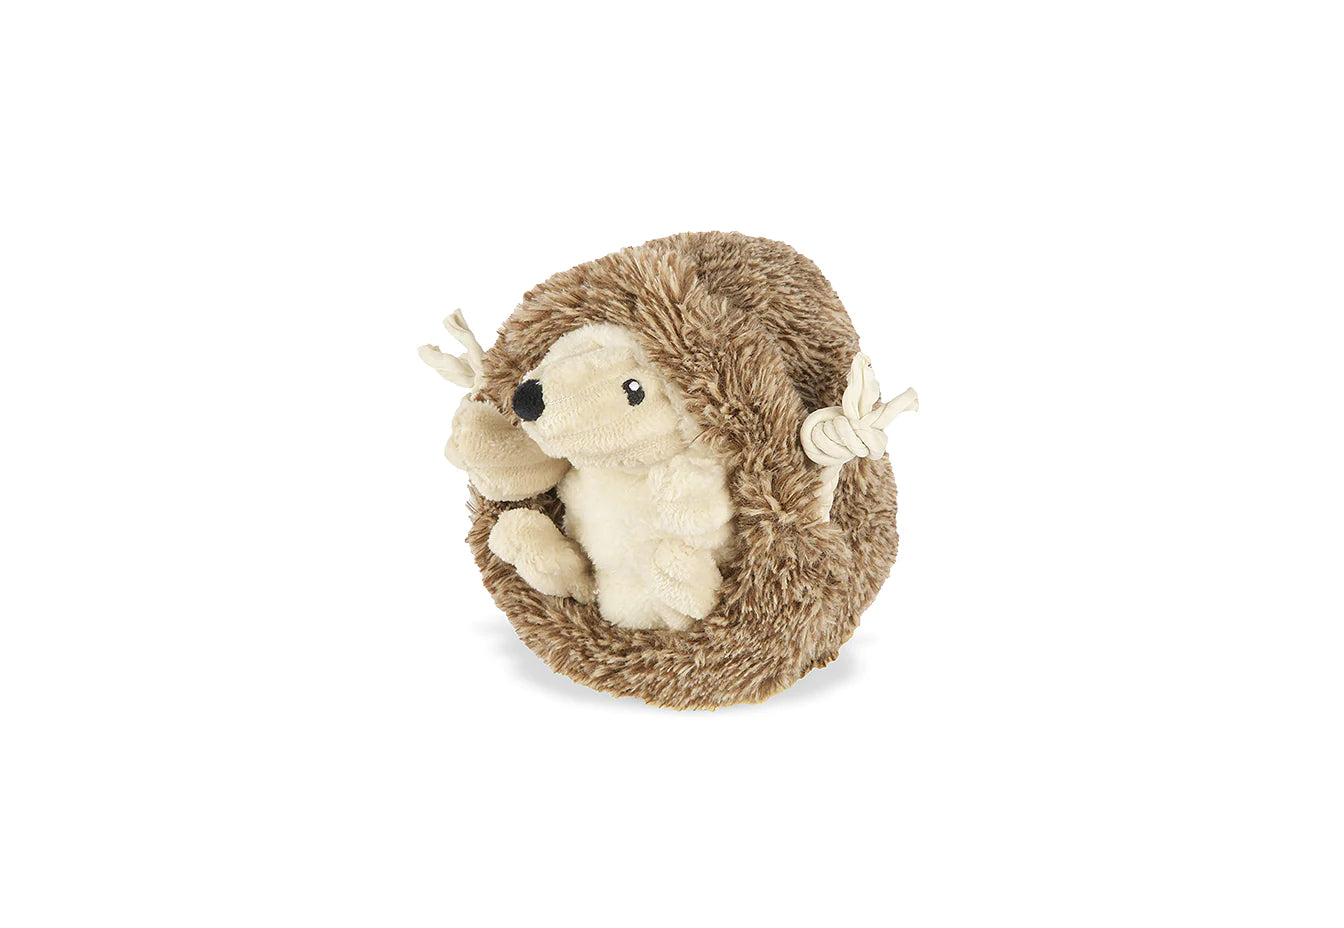 Hamilton the Hedgehog Toy | P.L.A.Y. Forest Friends Series